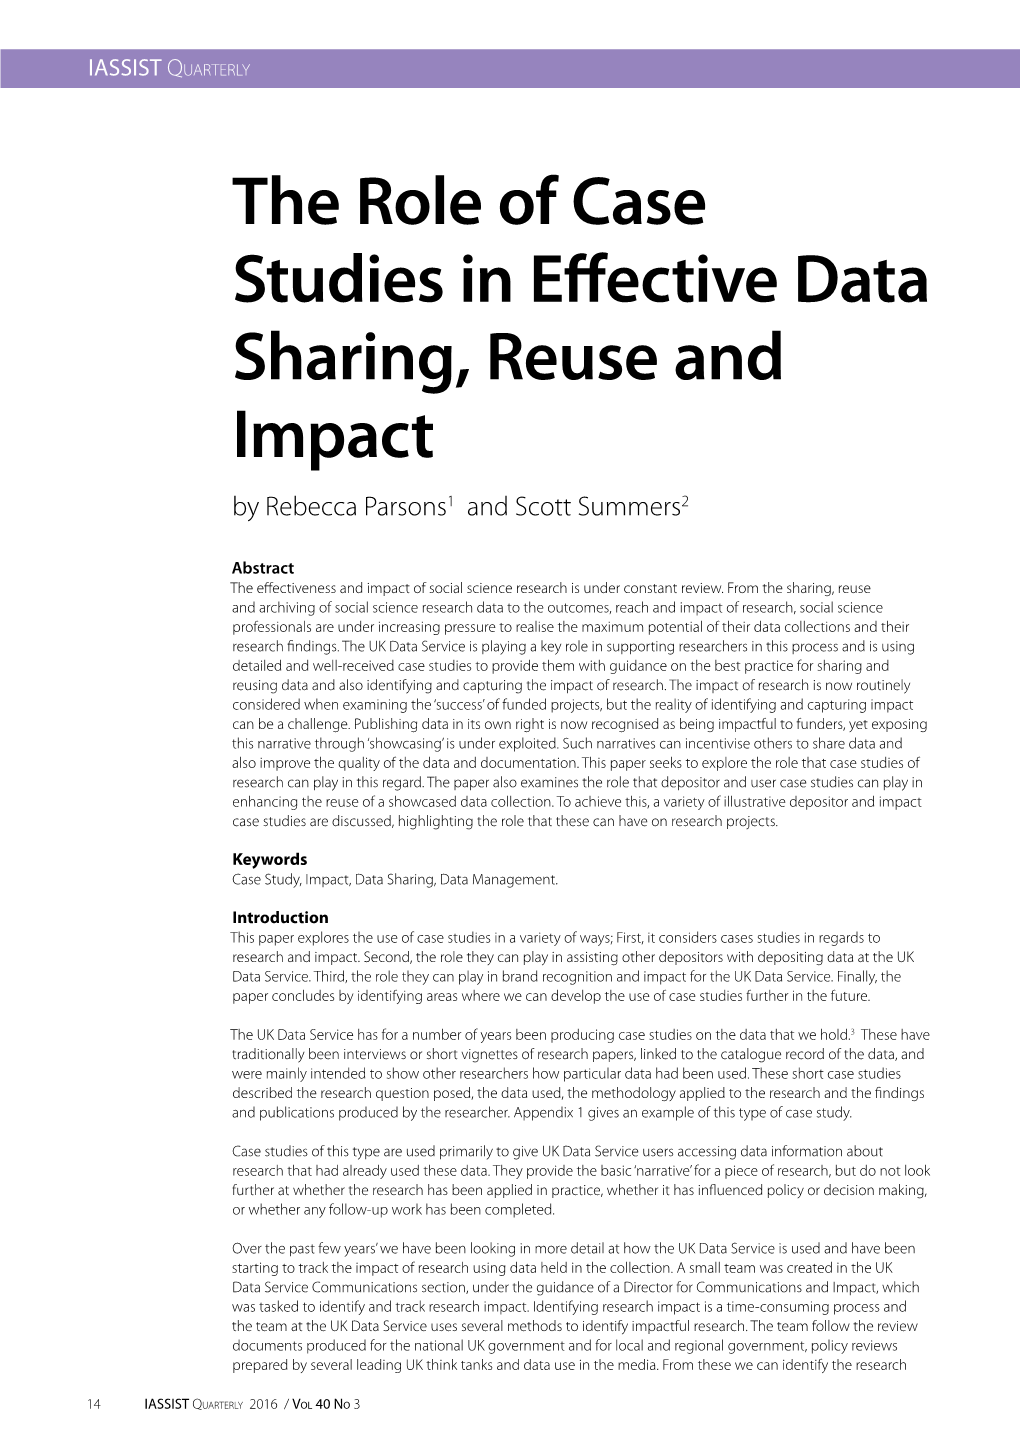 The Role of Case Studies in Effective Data Sharing, Reuse and Impact by Rebecca Parsons1 and Scott Summers2